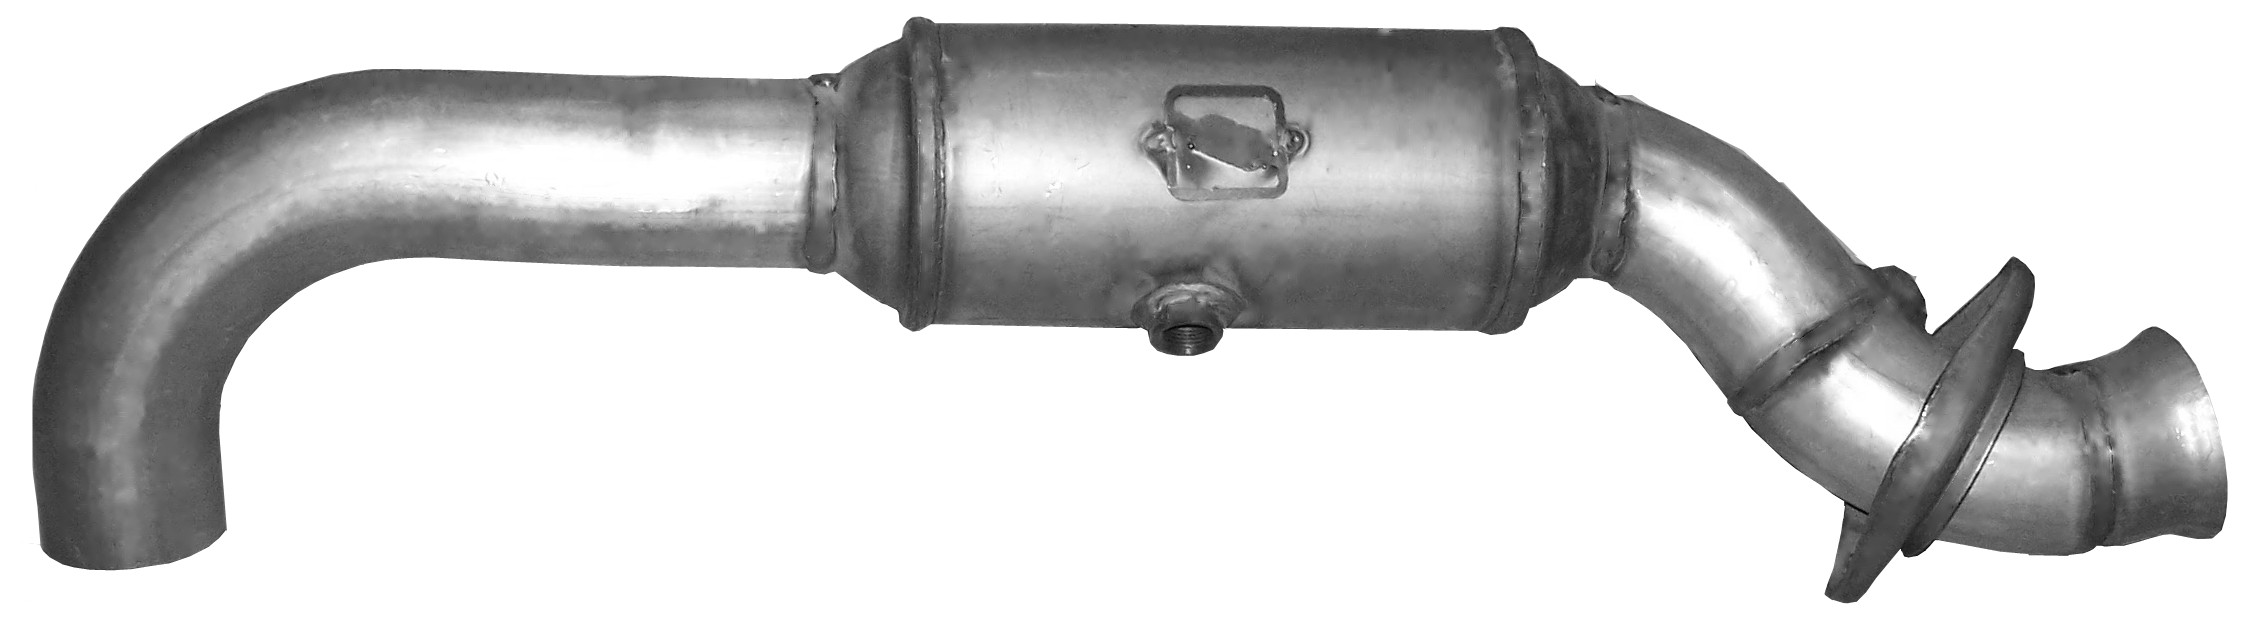 (24389-5) Catalyseur Direct-Fit Ford/Lincoln